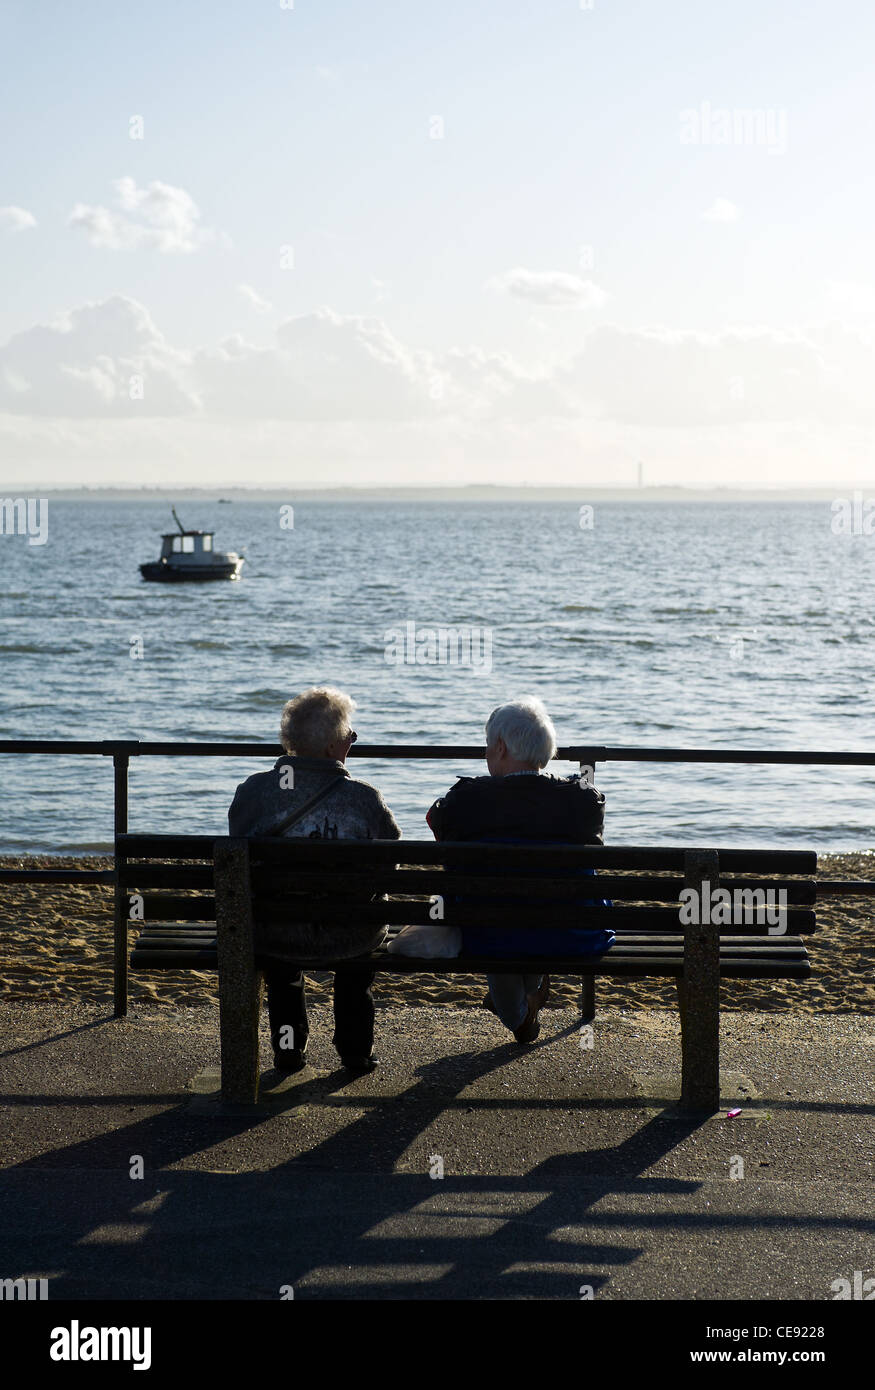 Two people sitting on a bench overlooking the Thames Estuary Stock Photo